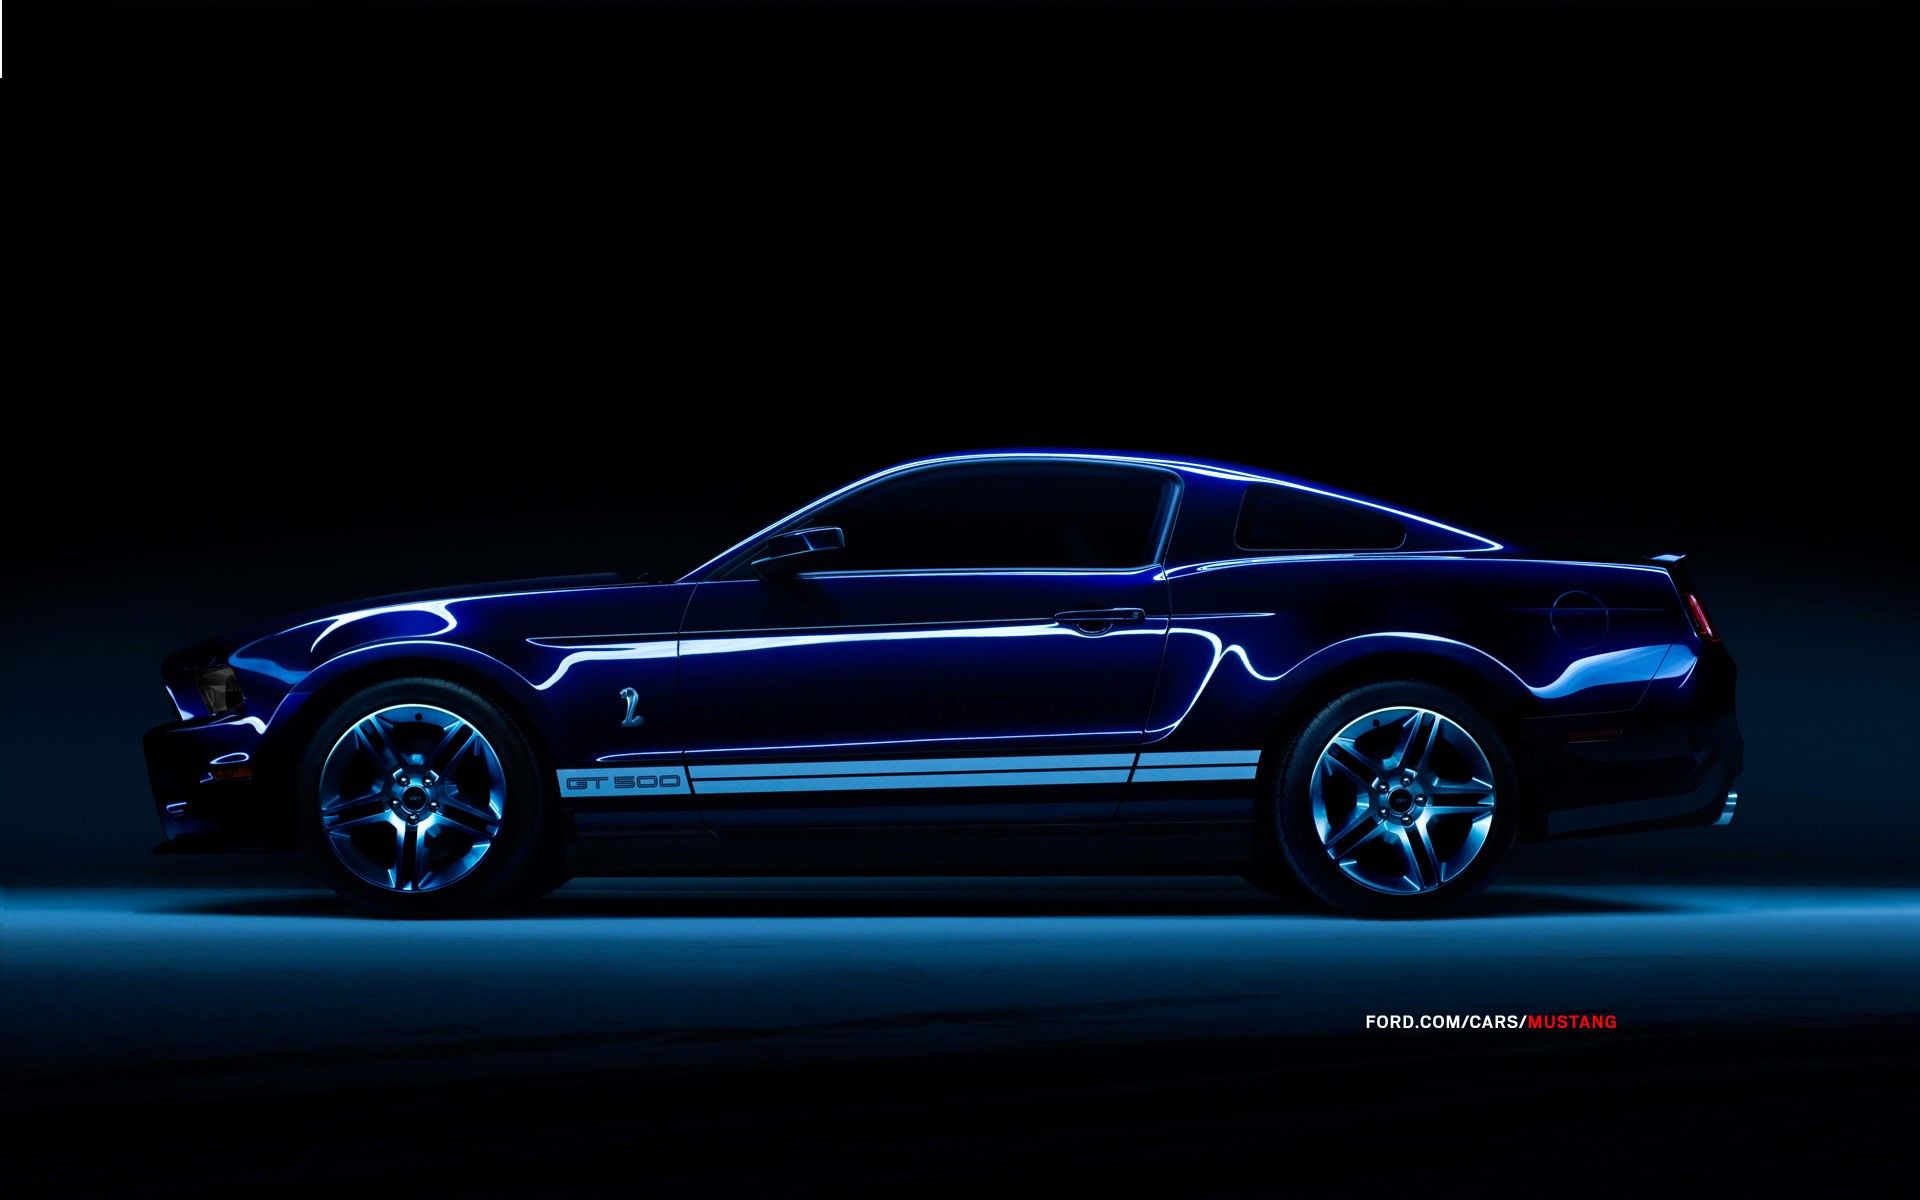 Free download Ford Mustang Shelby GT500 Computer Wallpaper Desktop Background [1920x1200] for your Desktop, Mobile & Tablet. Explore Shelby Mustang Wallpaper for Computer. Mustang Desktop Wallpaper, Mustang Gt500 Wallpaper